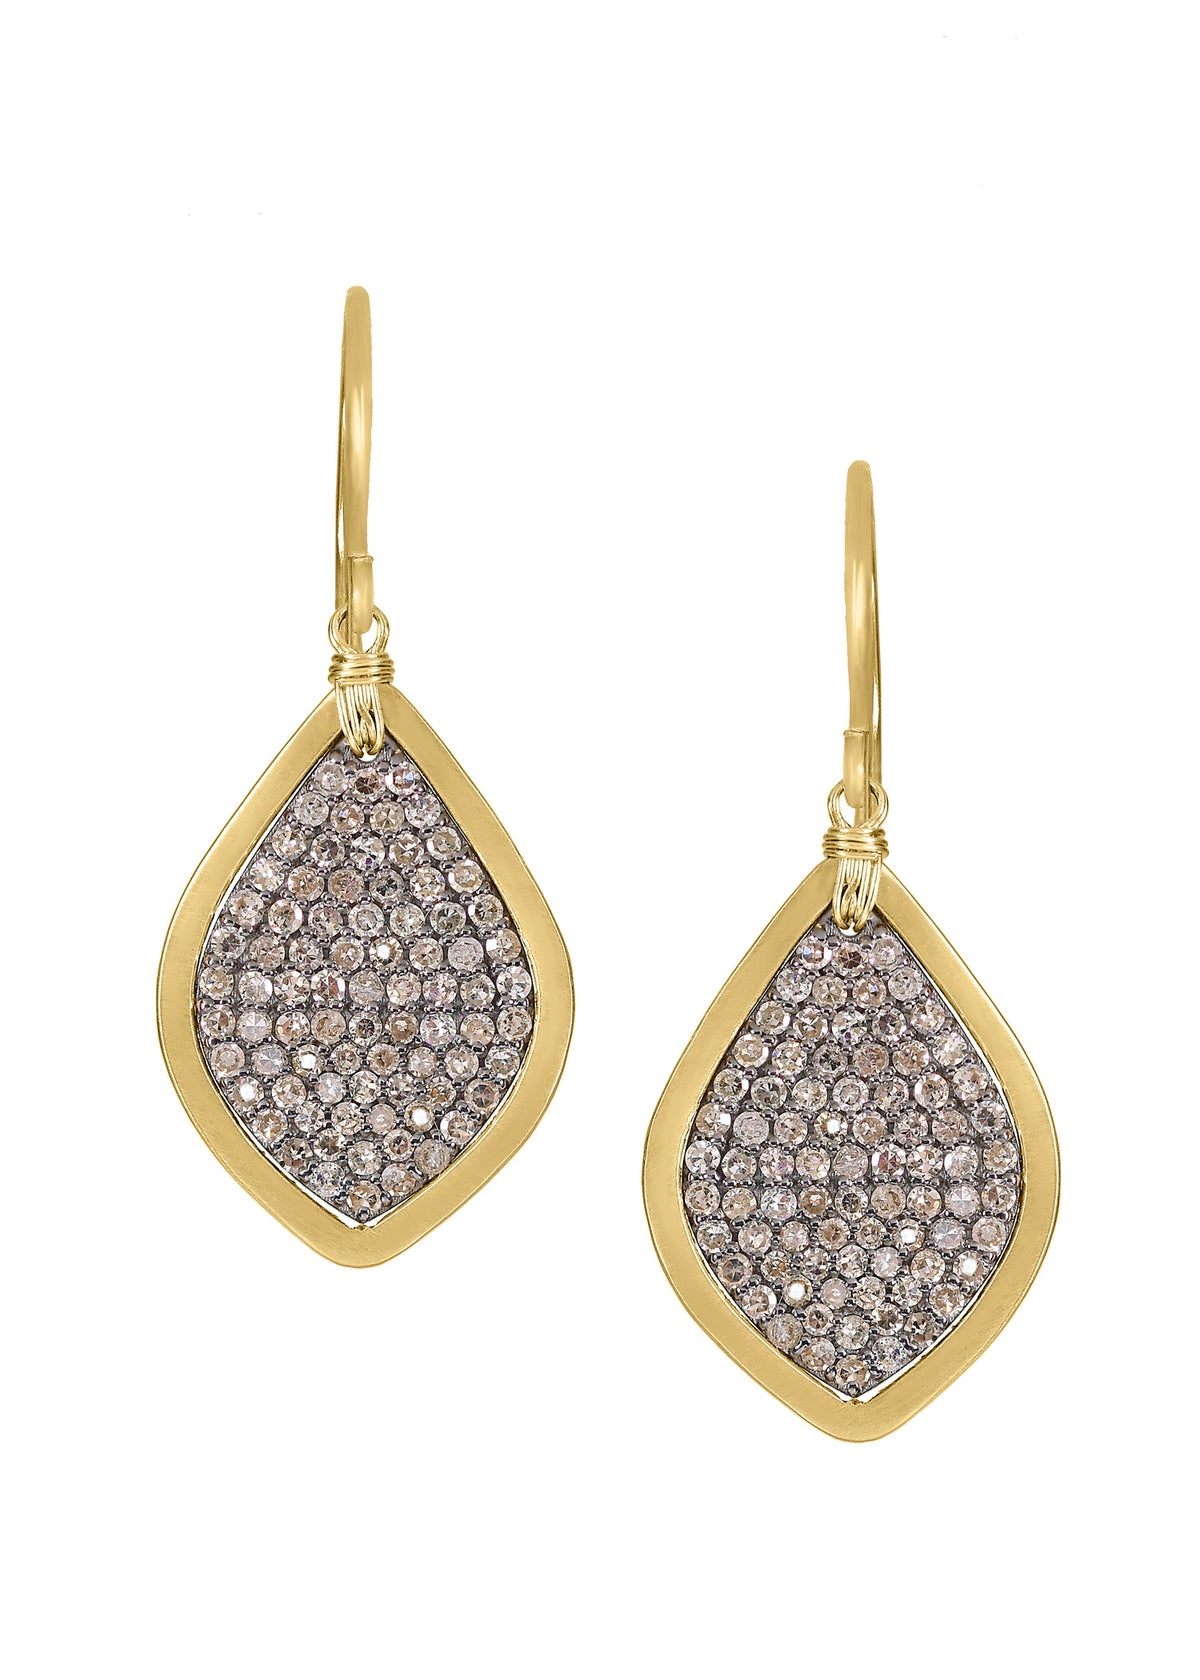 Diamond 14k gold Sterling silver Mixed metal Special order only Earrings measure 1-3/16&quot; in length (including the ear wires) and 1/2&quot; in width at the widest point Handmade in our Los Angeles studio